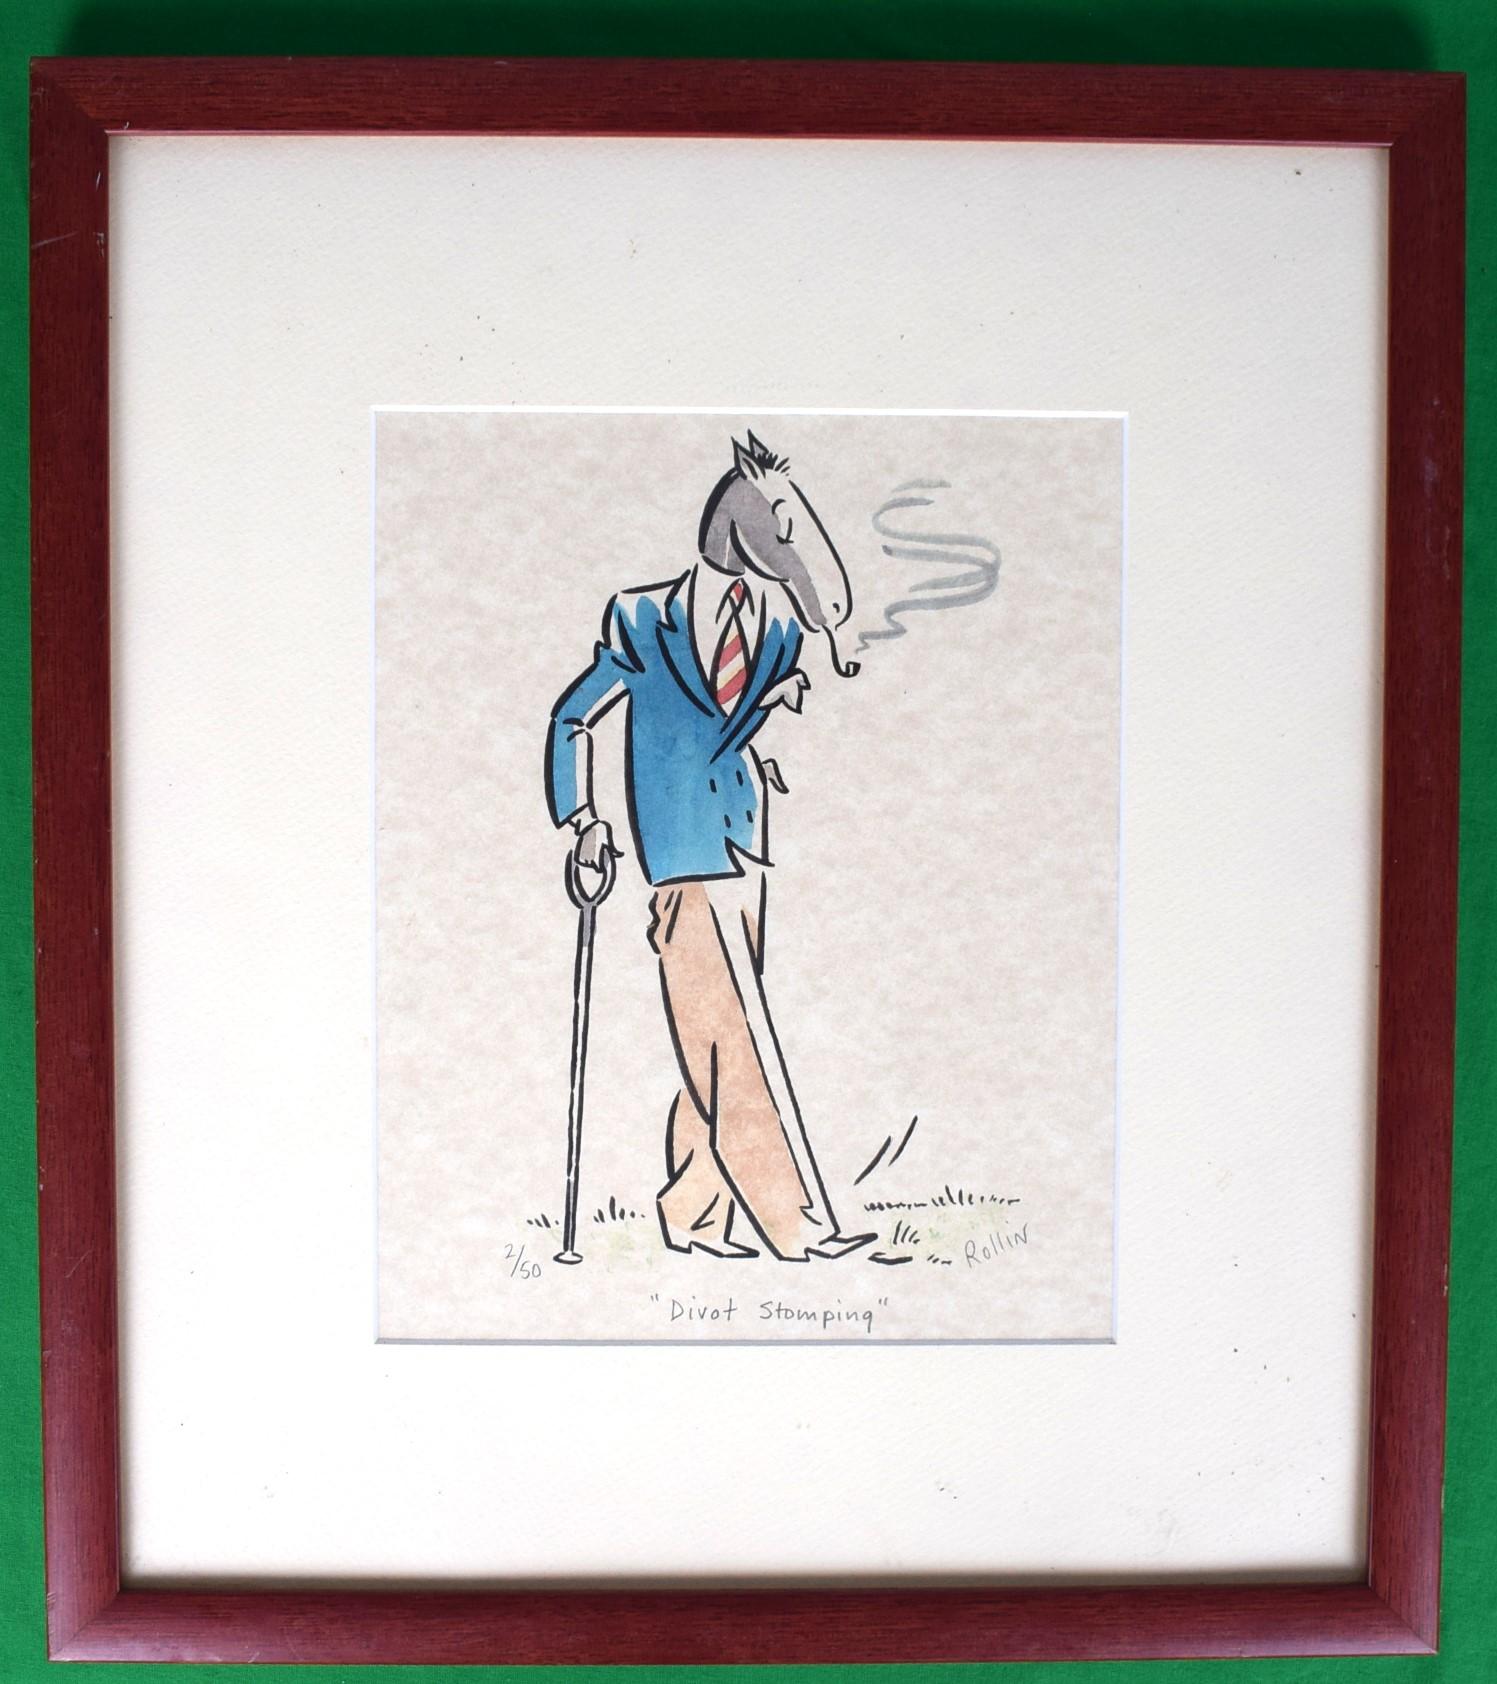 "Divot Stomping" by Rollin McGrail - Print by Rollin McGrail 